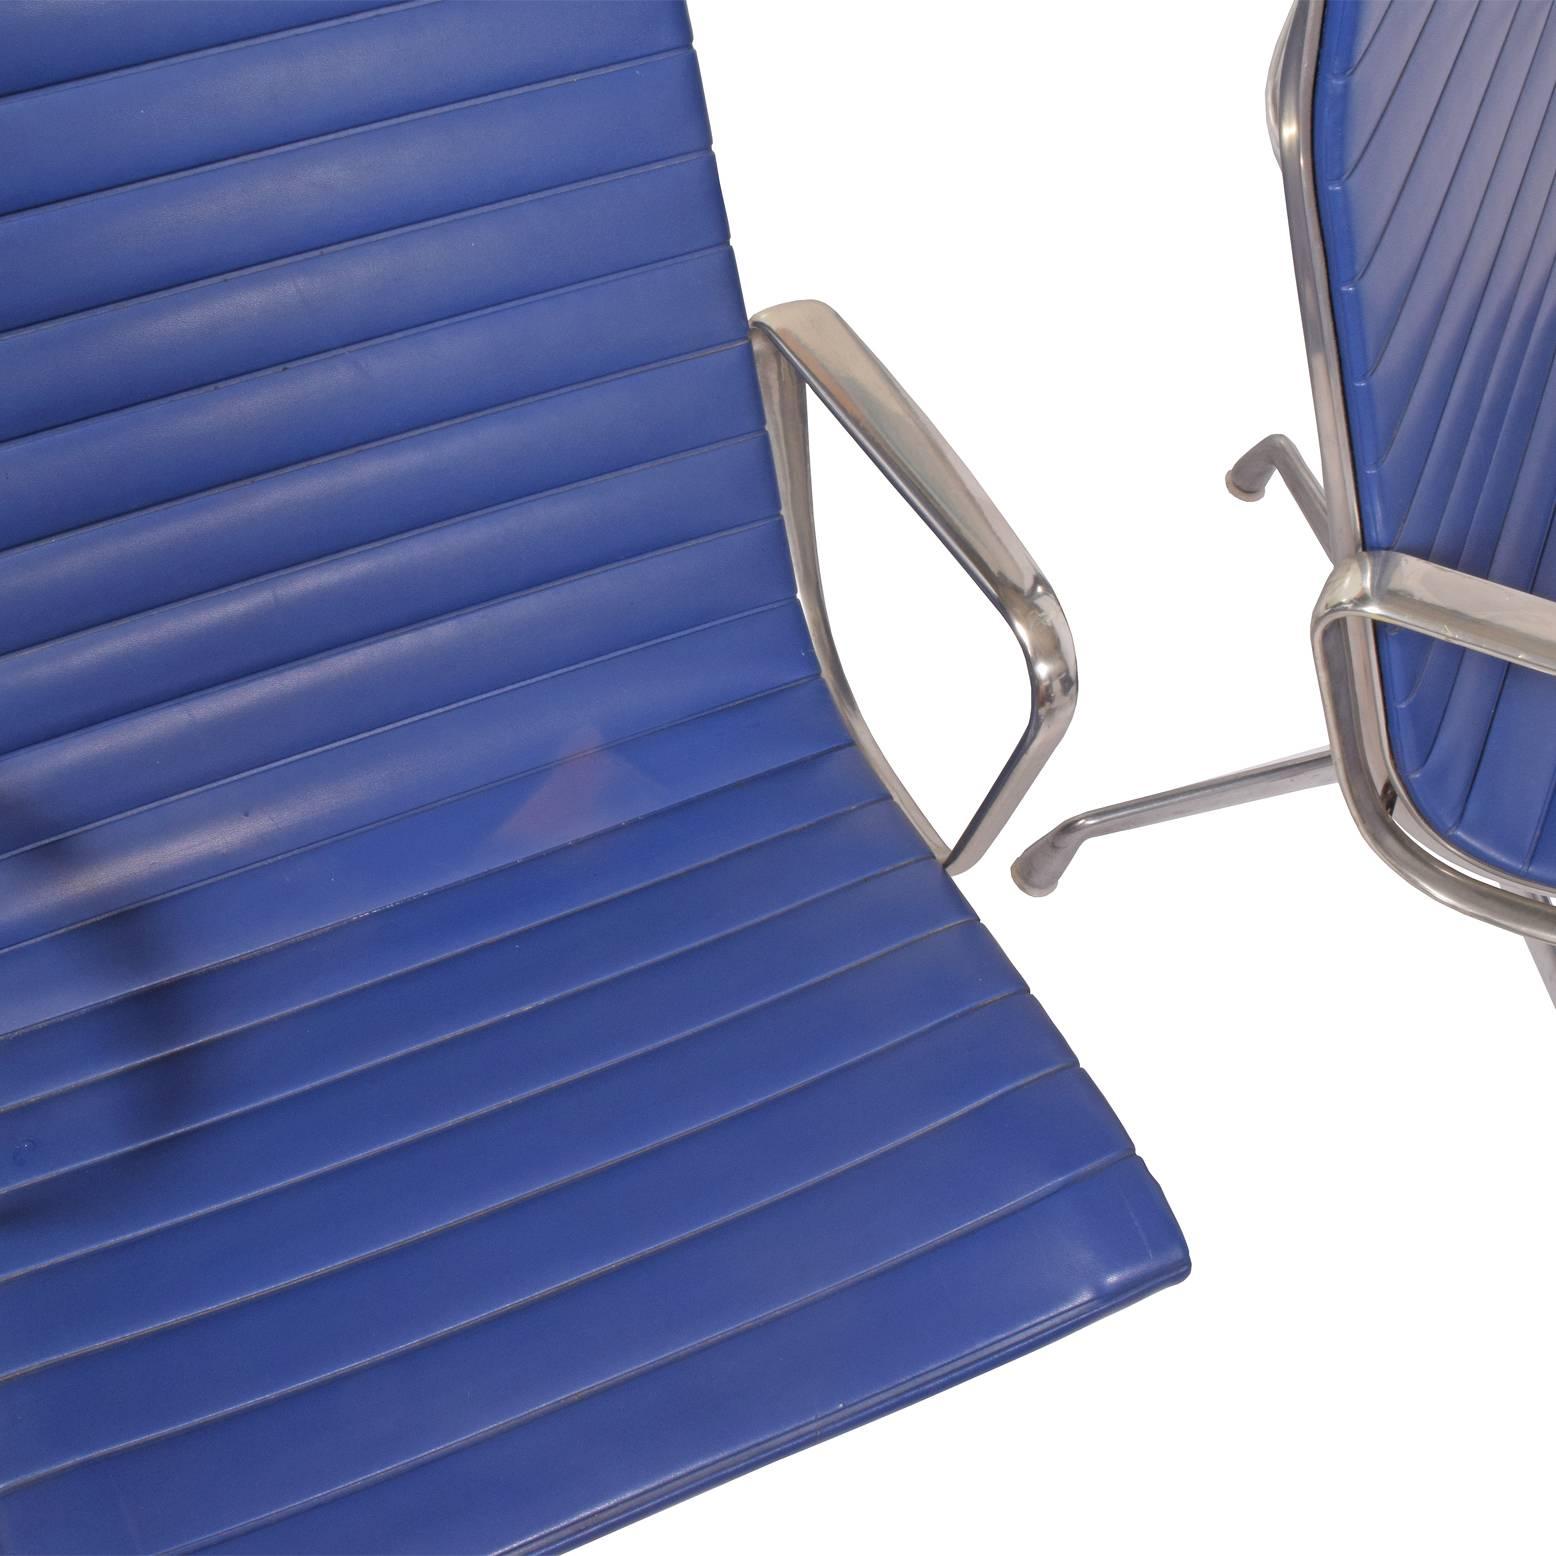 American Only two Aluminium Group Chairs by Charles Eames for Herman Miller